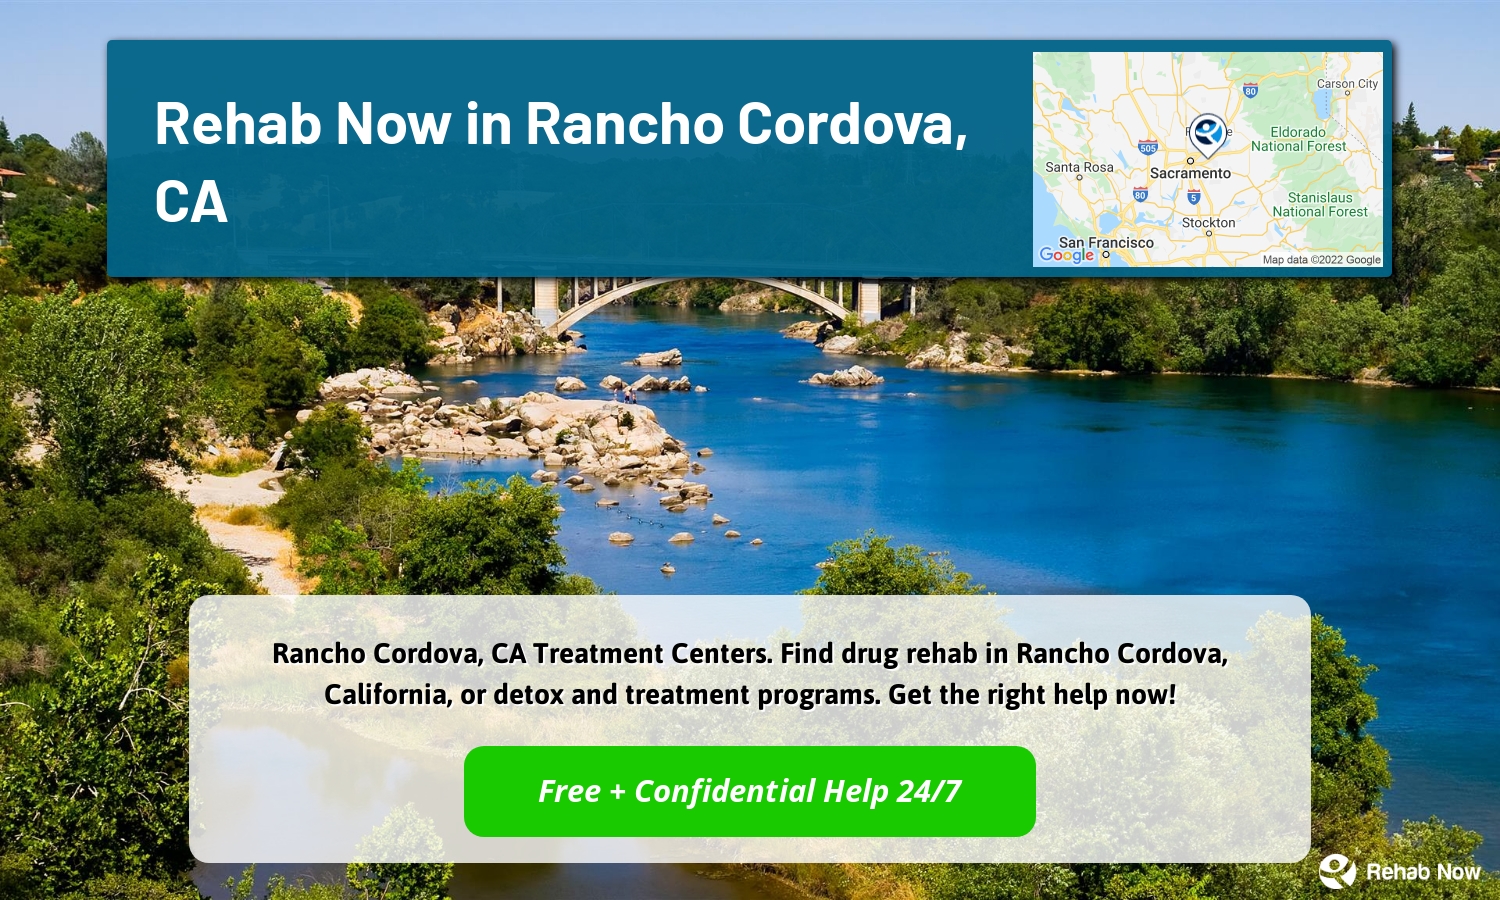 Rancho Cordova, CA Treatment Centers. Find drug rehab in Rancho Cordova, California, or detox and treatment programs. Get the right help now!